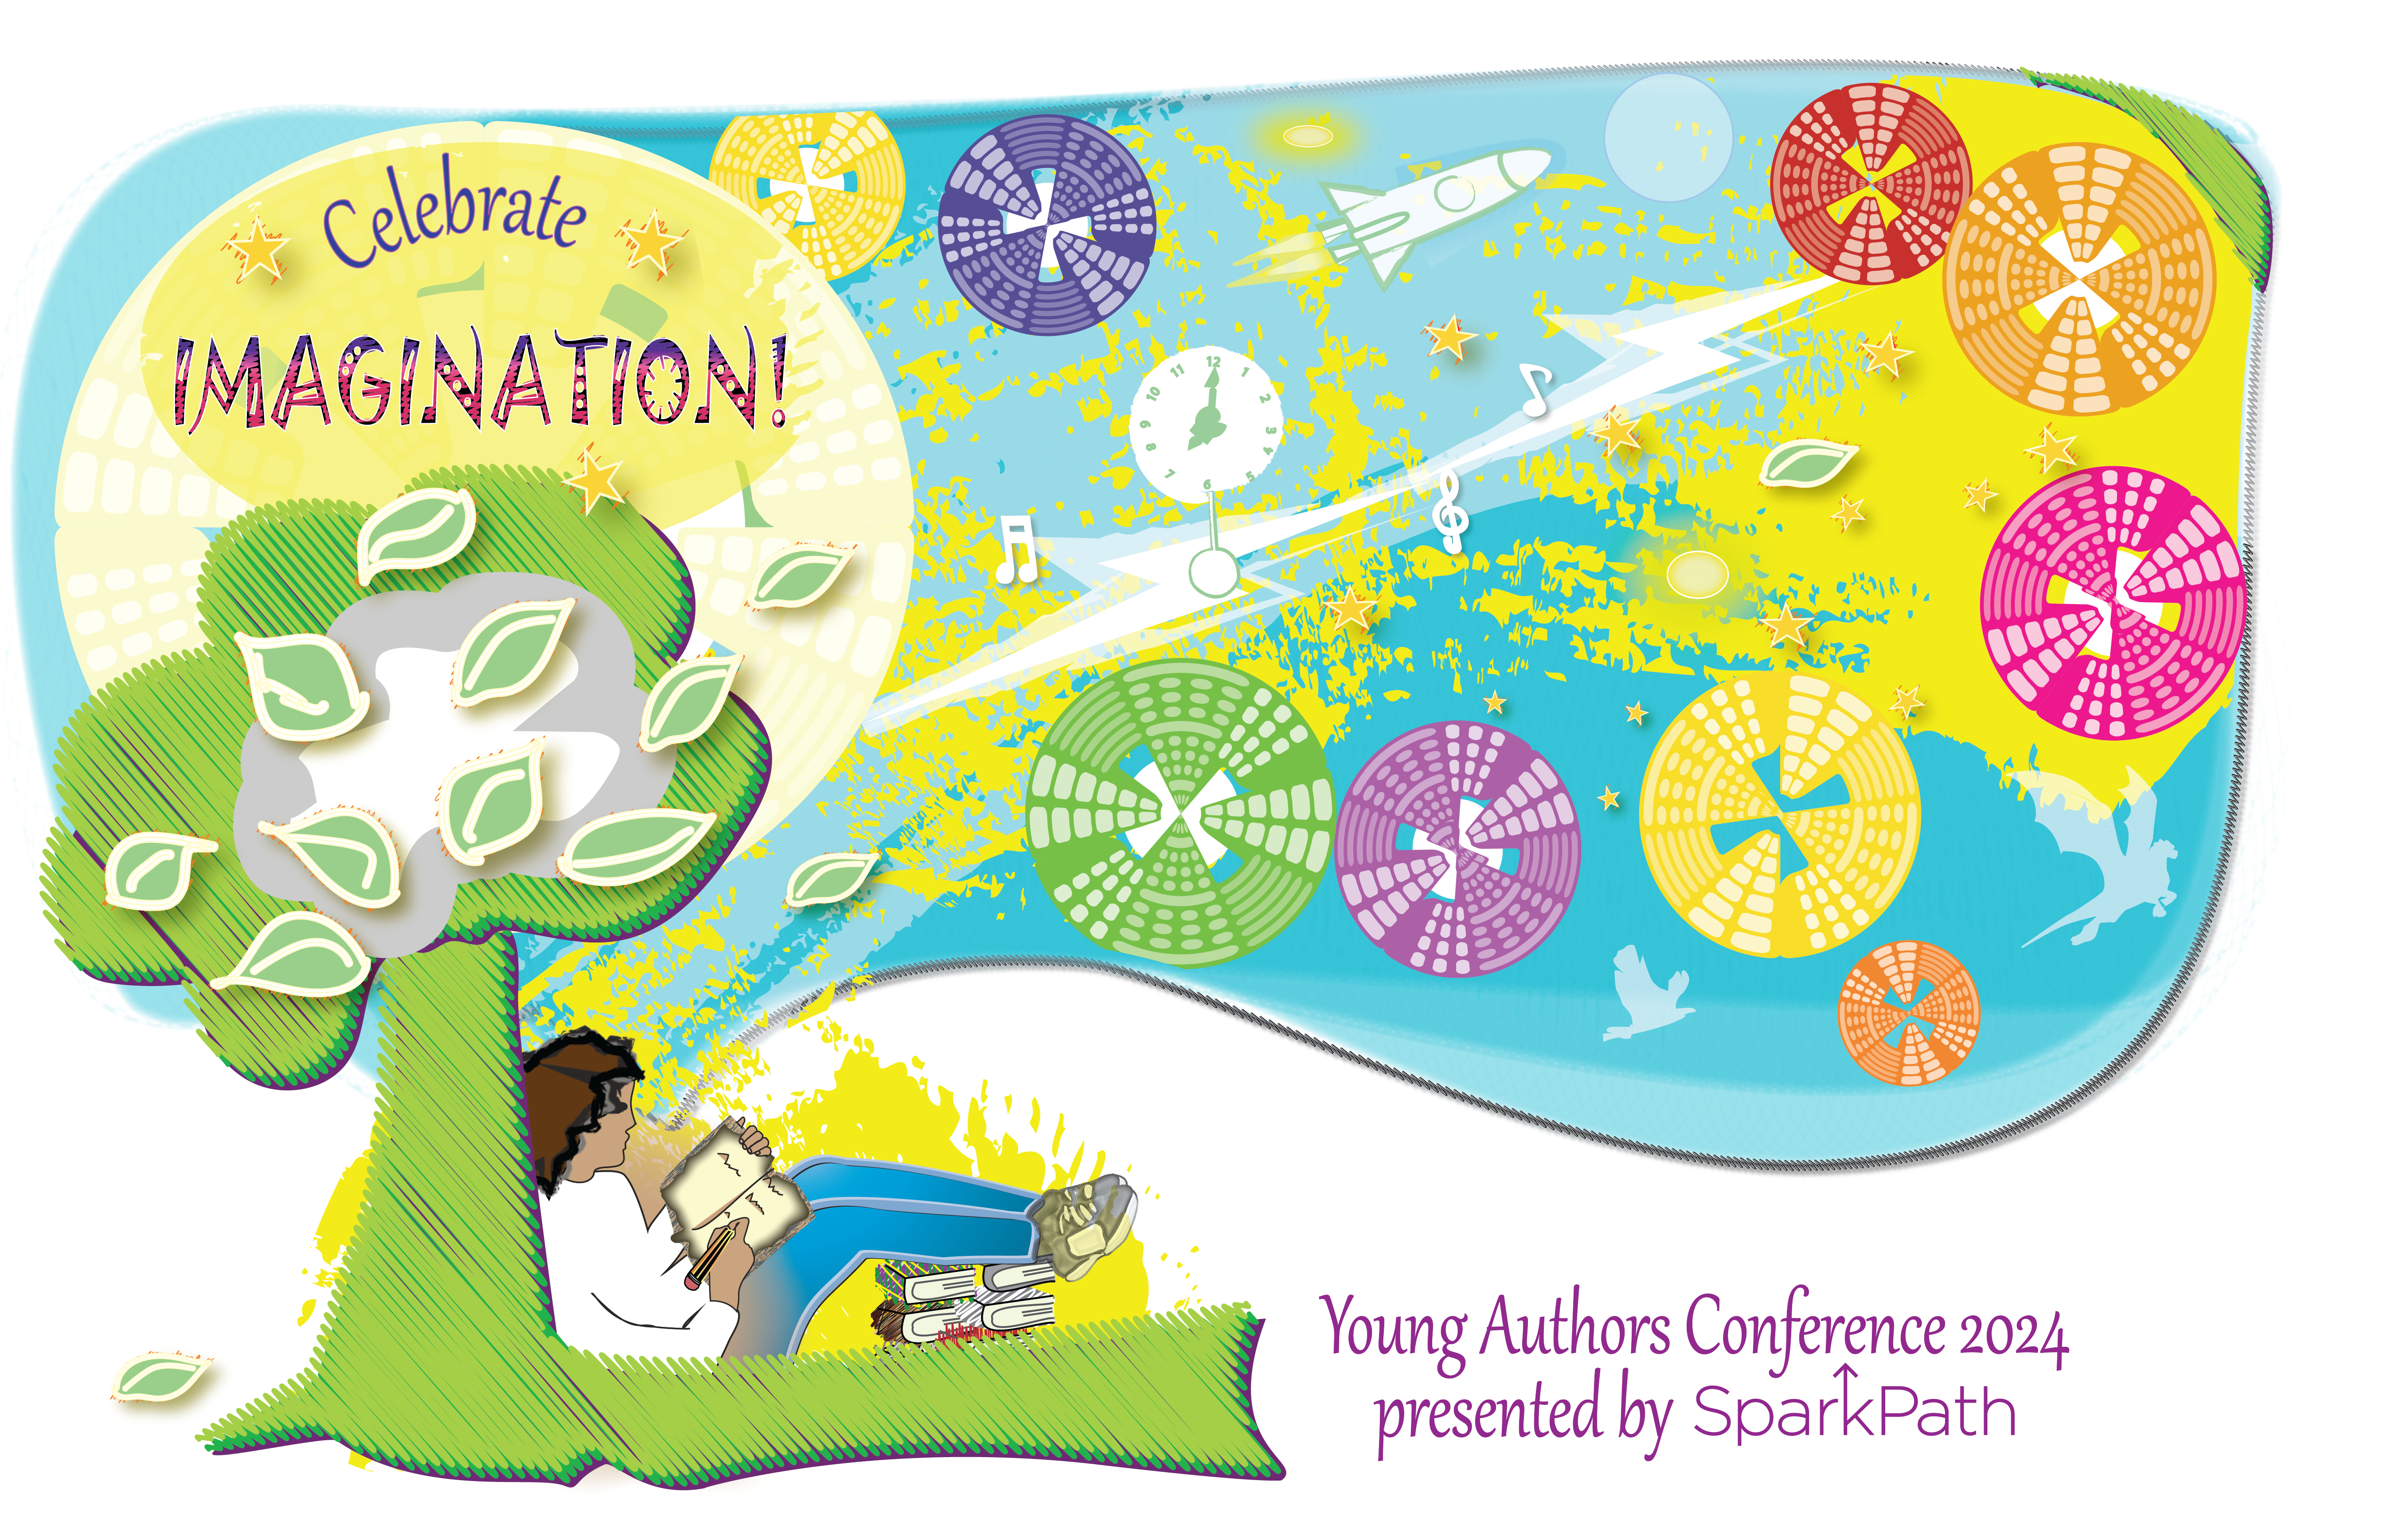 Young Authors Conference logo. Student with book and pencil sitting under a tree with exploding color.